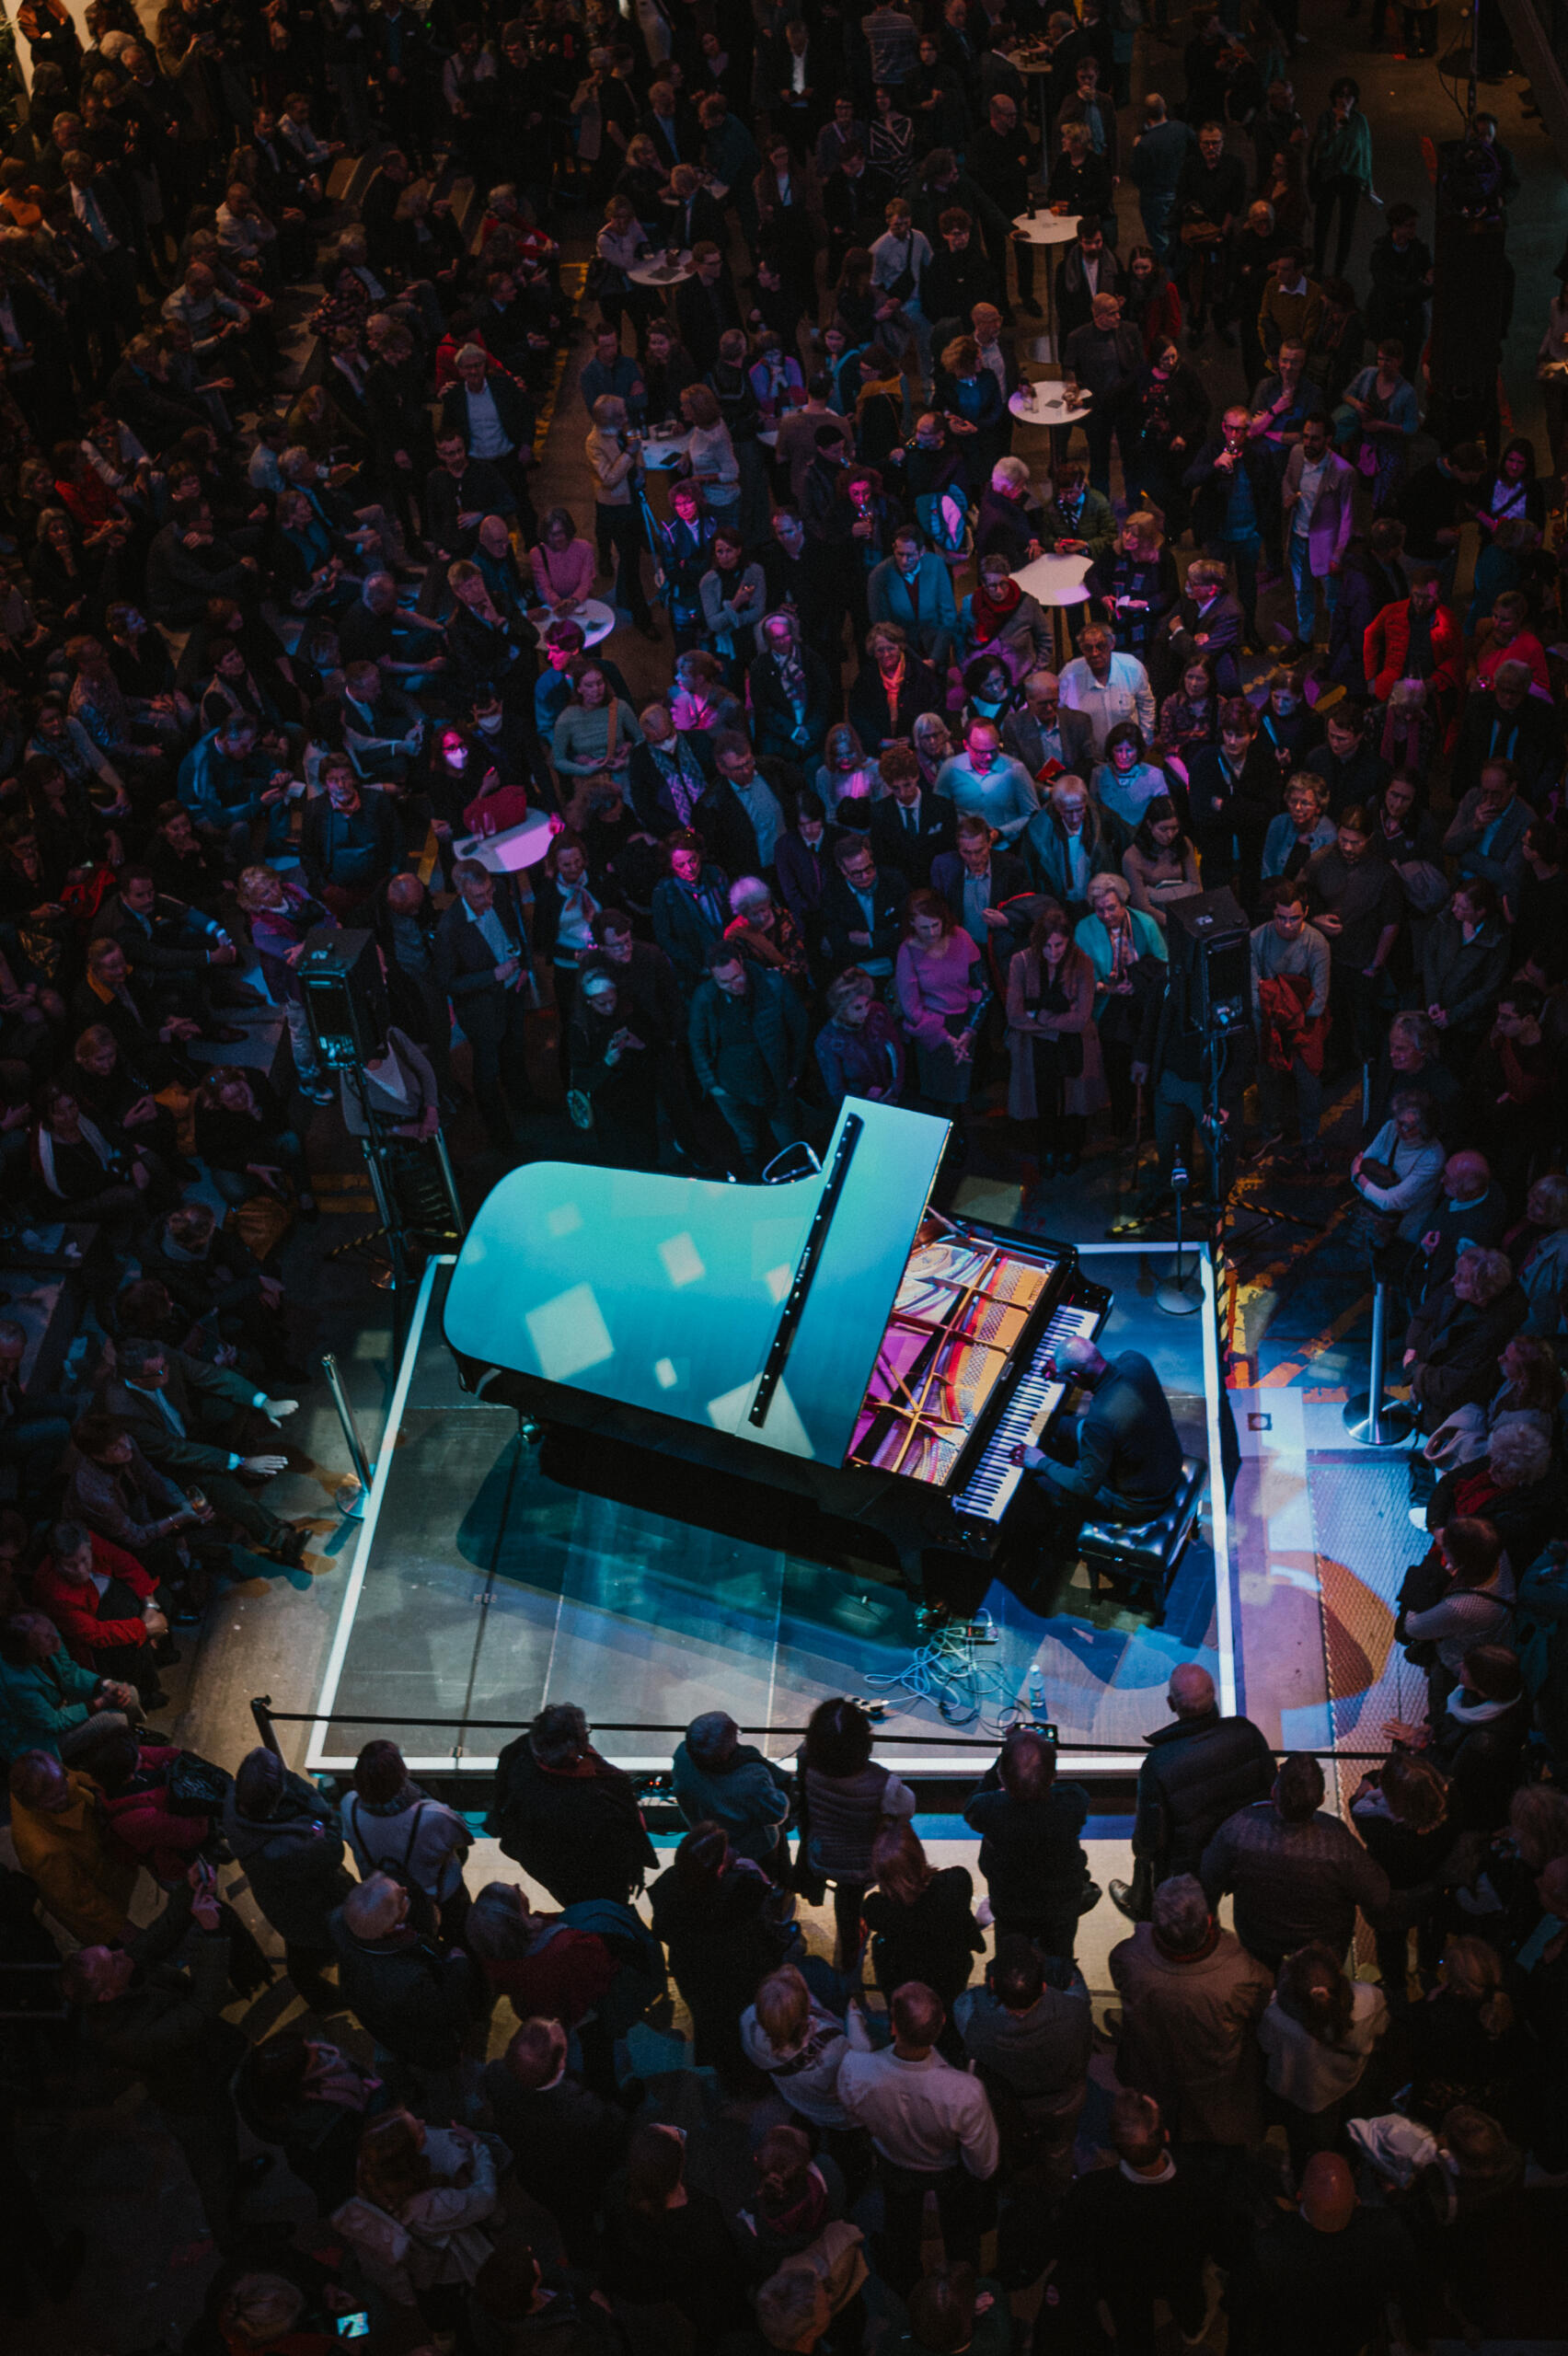 View from above of many people in a hall. They are standing around a grand piano with a pianist.